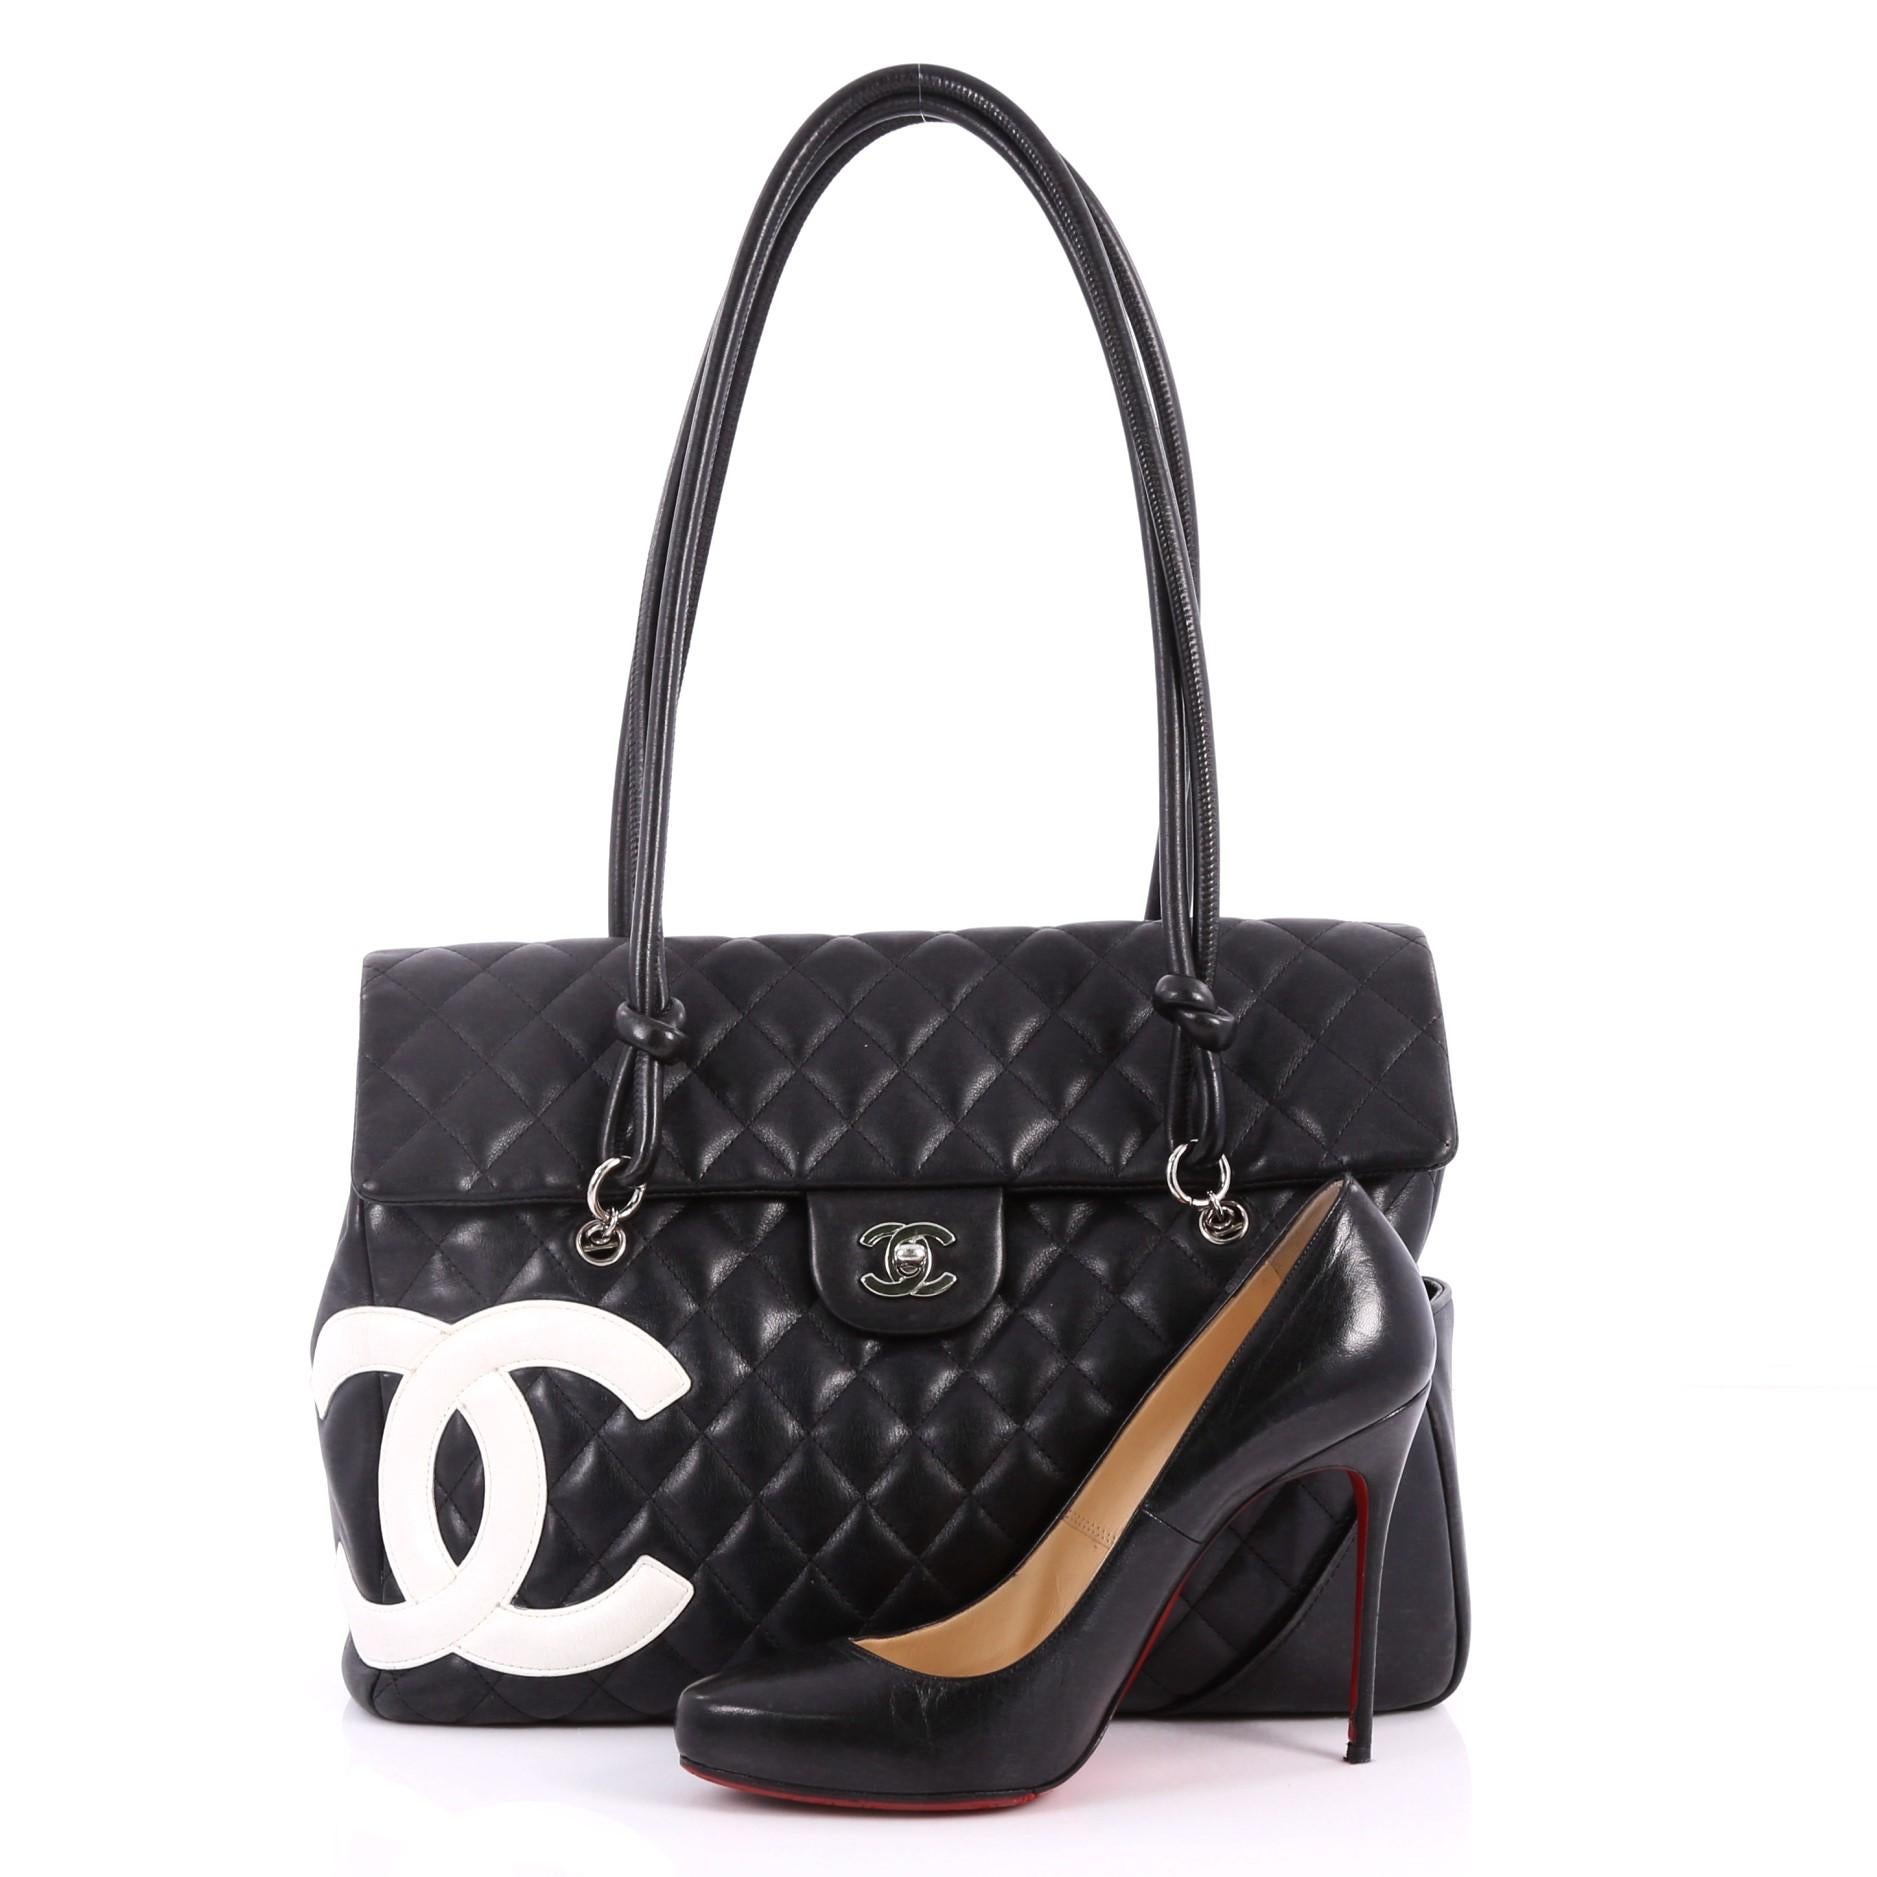 This authentic hard-to-find Chanel Cambon Flap Tote Quilted Leather Large is a stylish and functional accessory perfect for daily excursions. Crafted in black quilted leather, this tall tote features tall handles with knotted ends, signature white